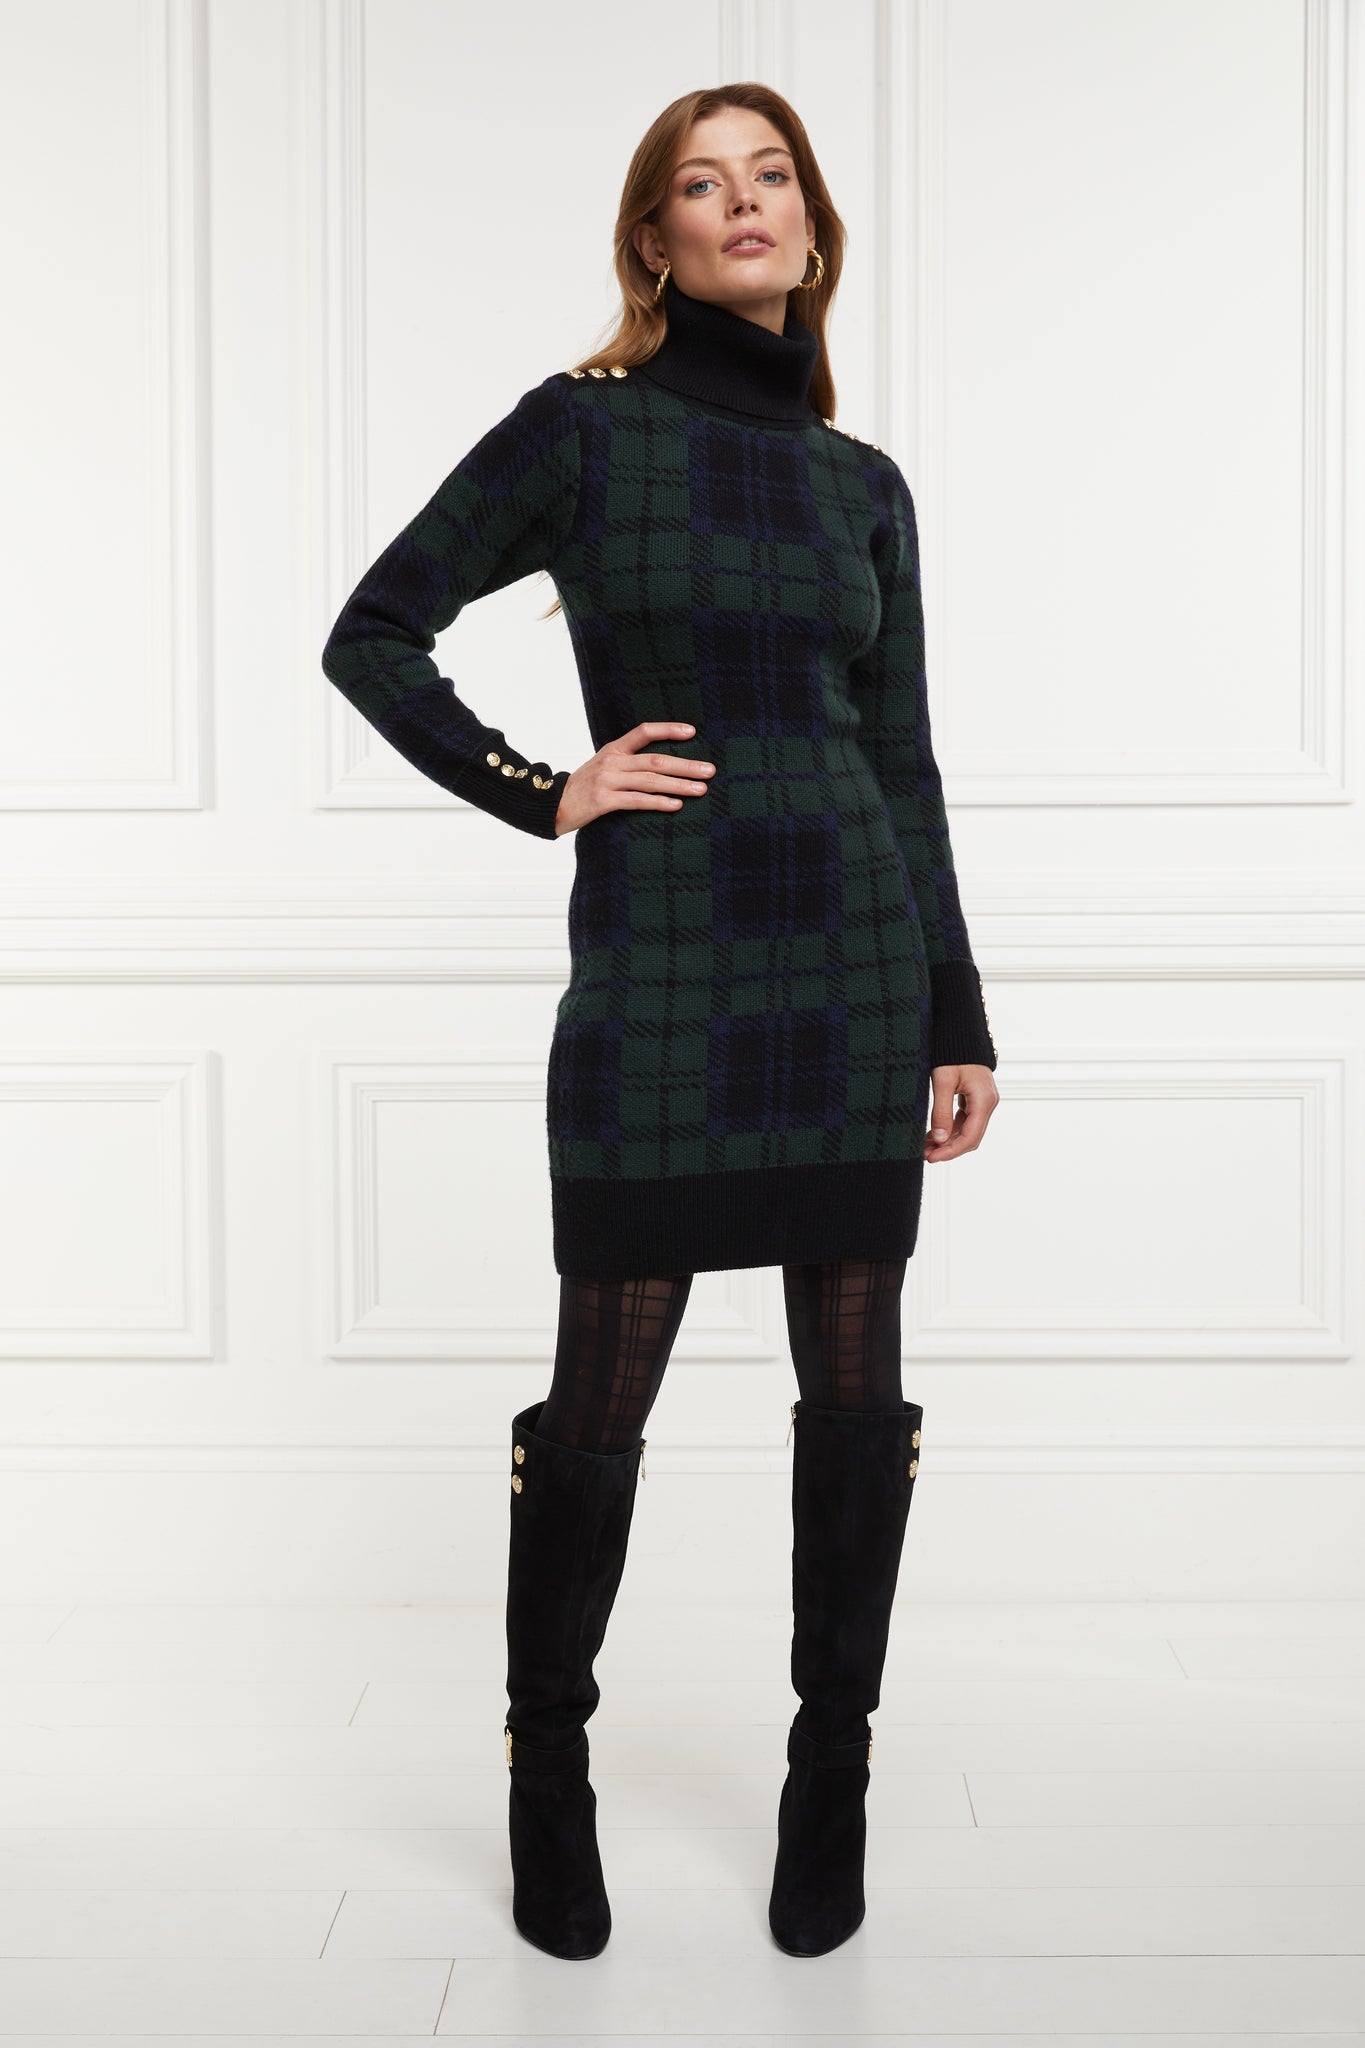 womens green navy and black blackwatch roll neck jumper dress with contrast black cuffs and ribbed hem with gold button detail on the cuffs and shoulder